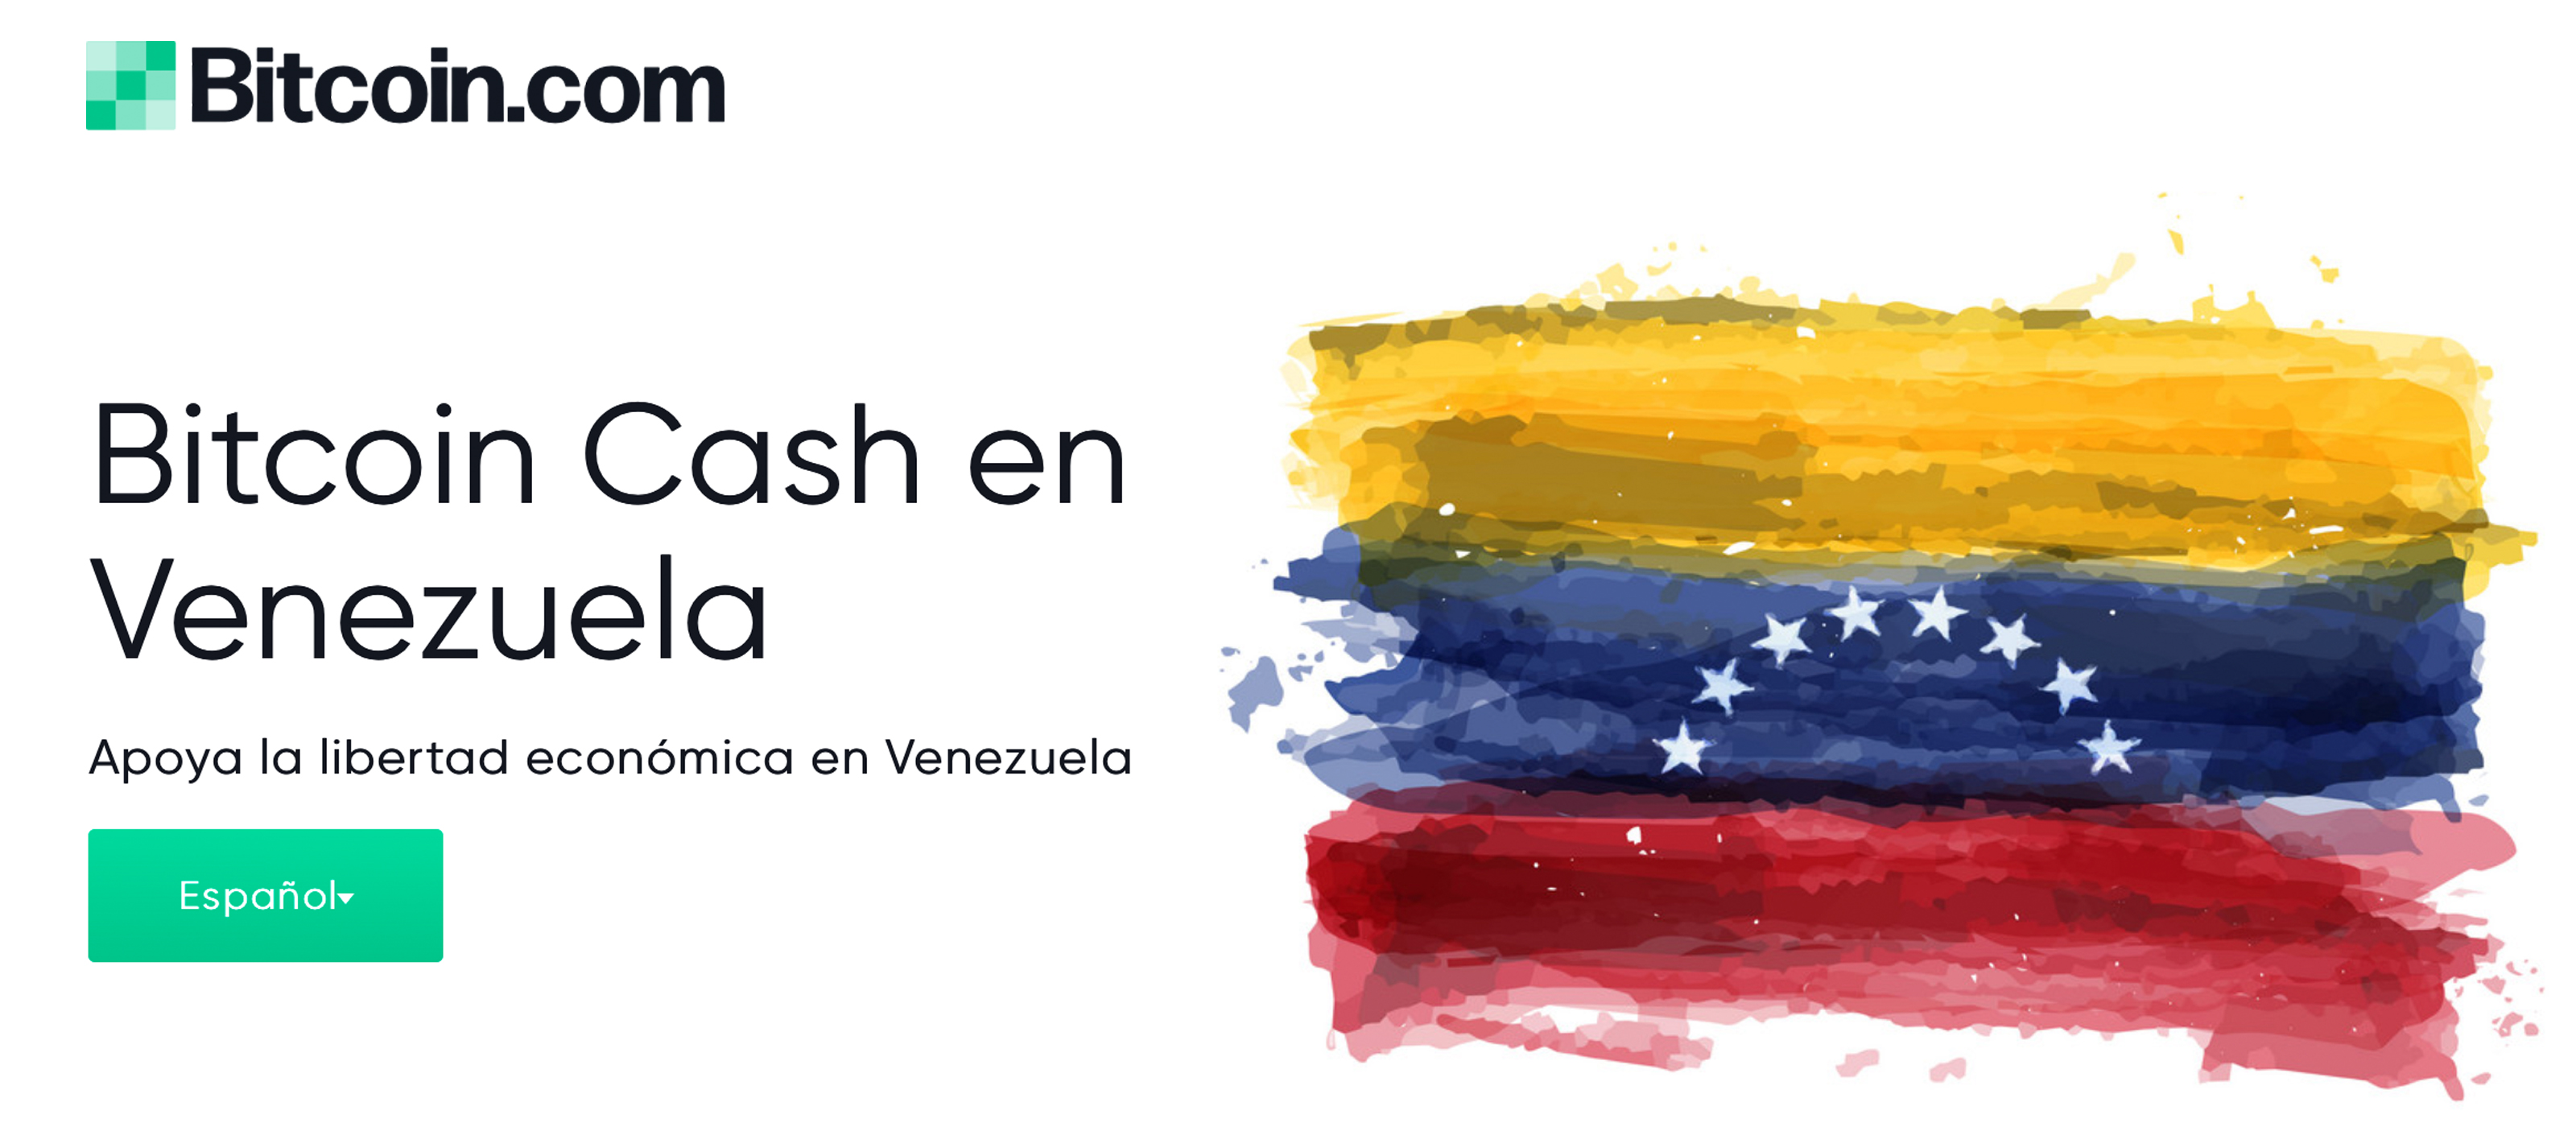 Venezuelan Pharmacy Chain Accepts Bitcoin Cash for Products and Medicine